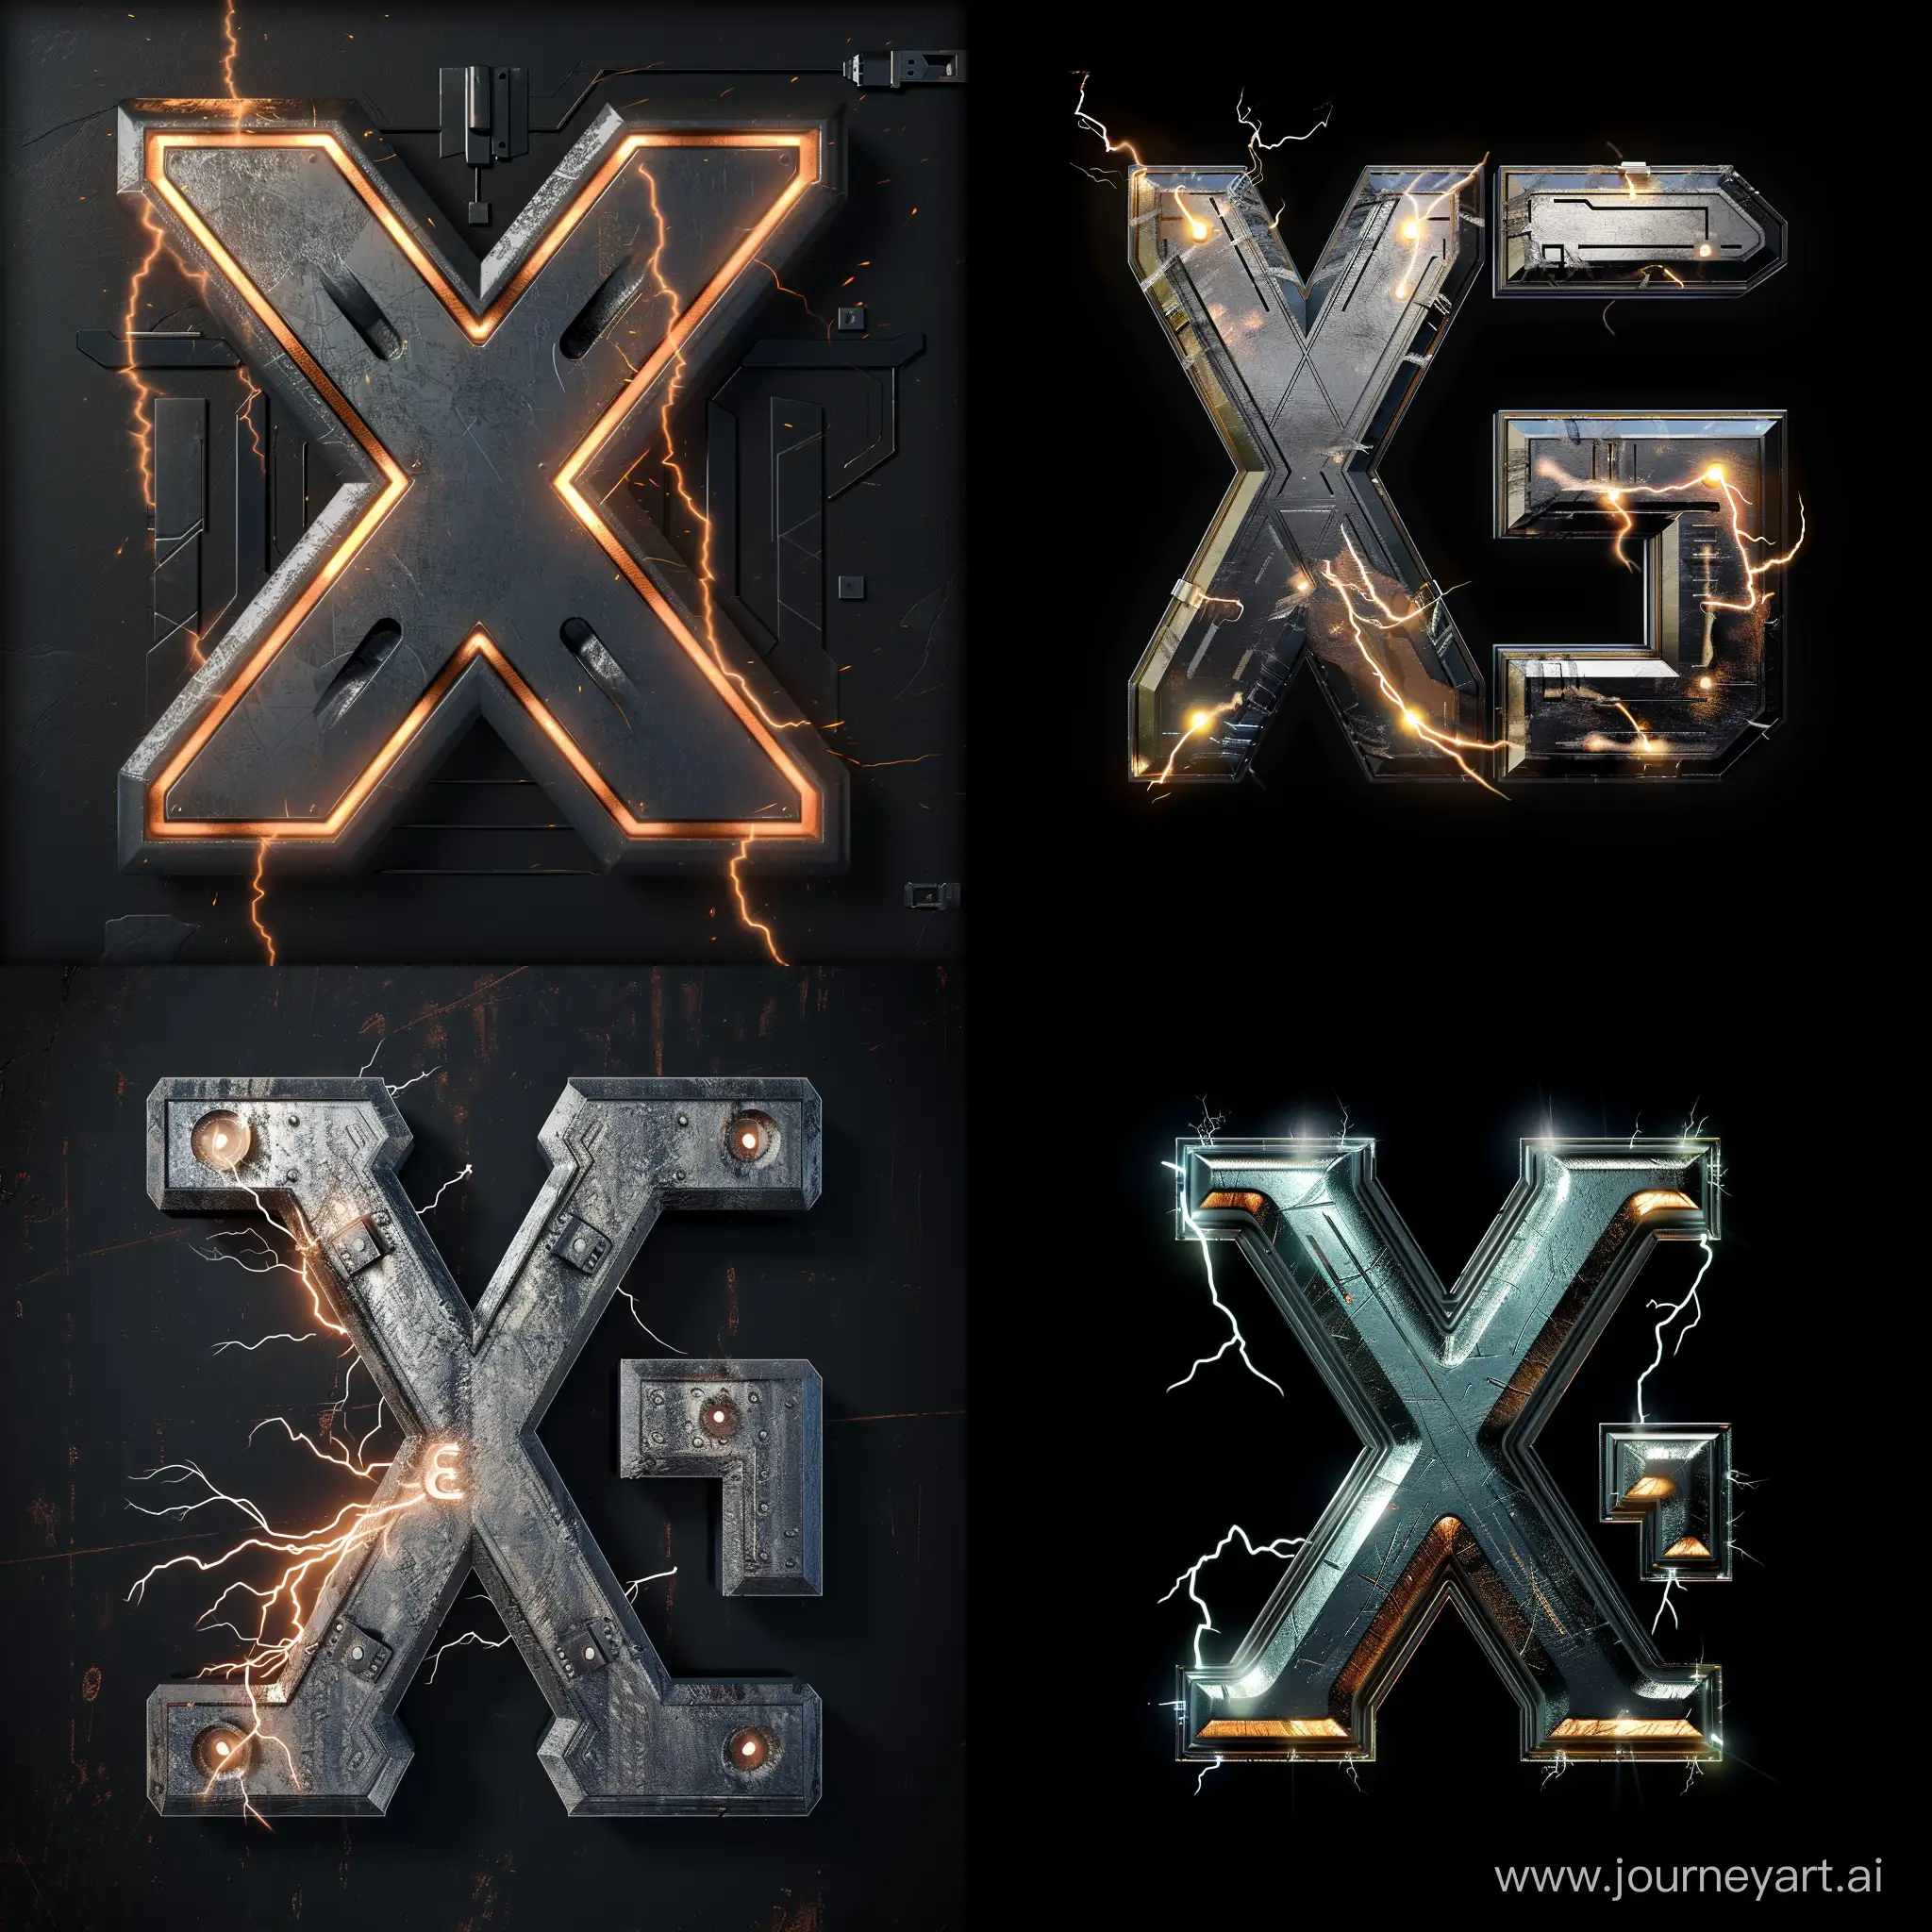 Futuristic-Merging-of-Metal-XG-Logo-with-Electric-Vibes